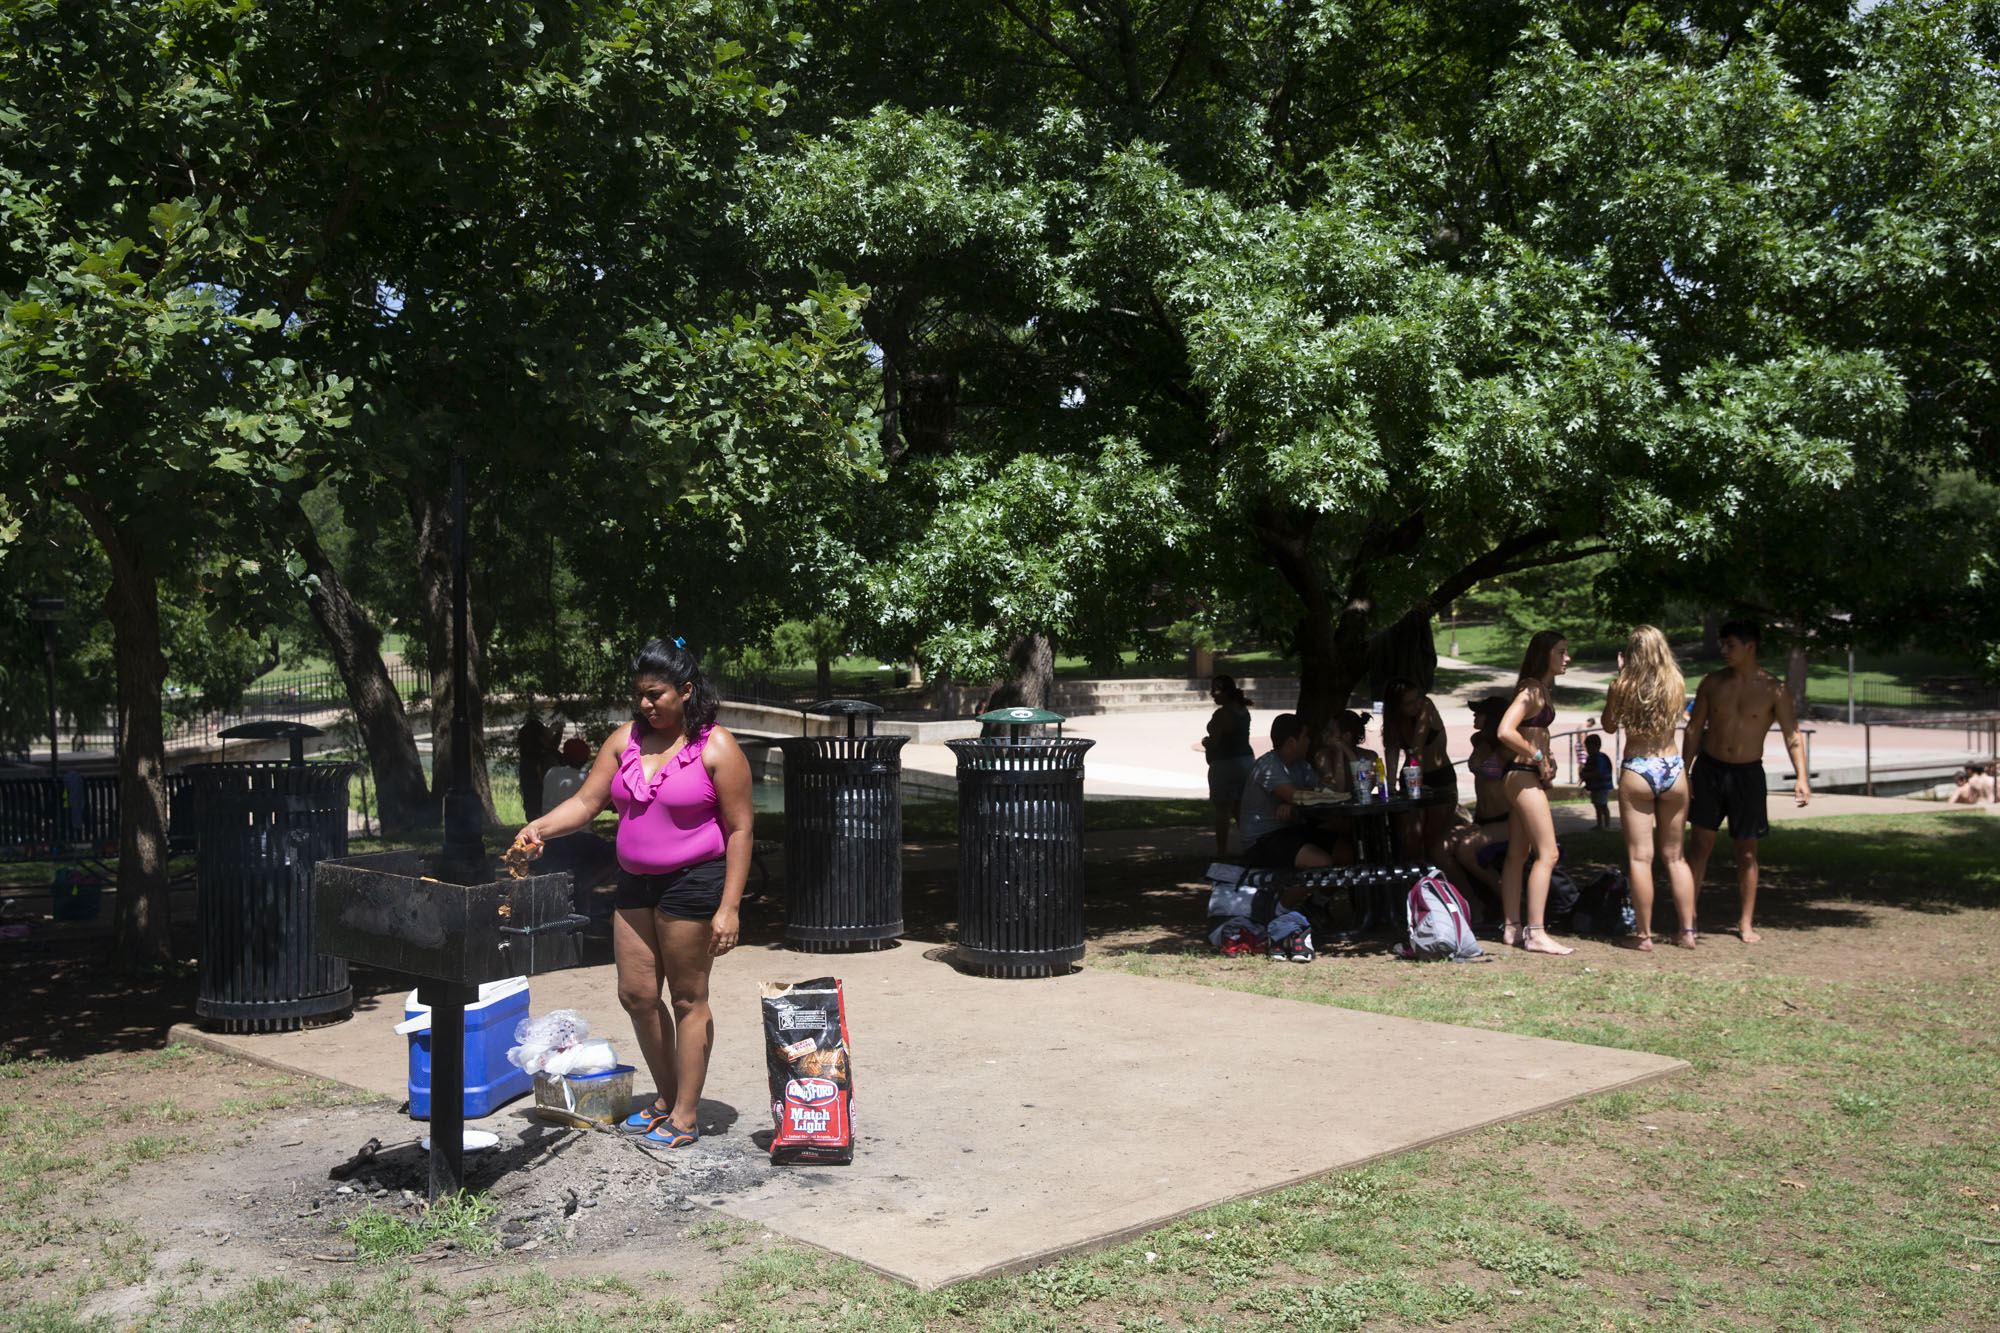  Lizeth Rosales, an asylum recipient from Honduras, grills meat at Texas State University’s Sewell Park in San Marcos on June 28, 2018. Rosales received asylum in May 2017 as a victim of domestic violence, a circumstance that Attorney General Jeff Se